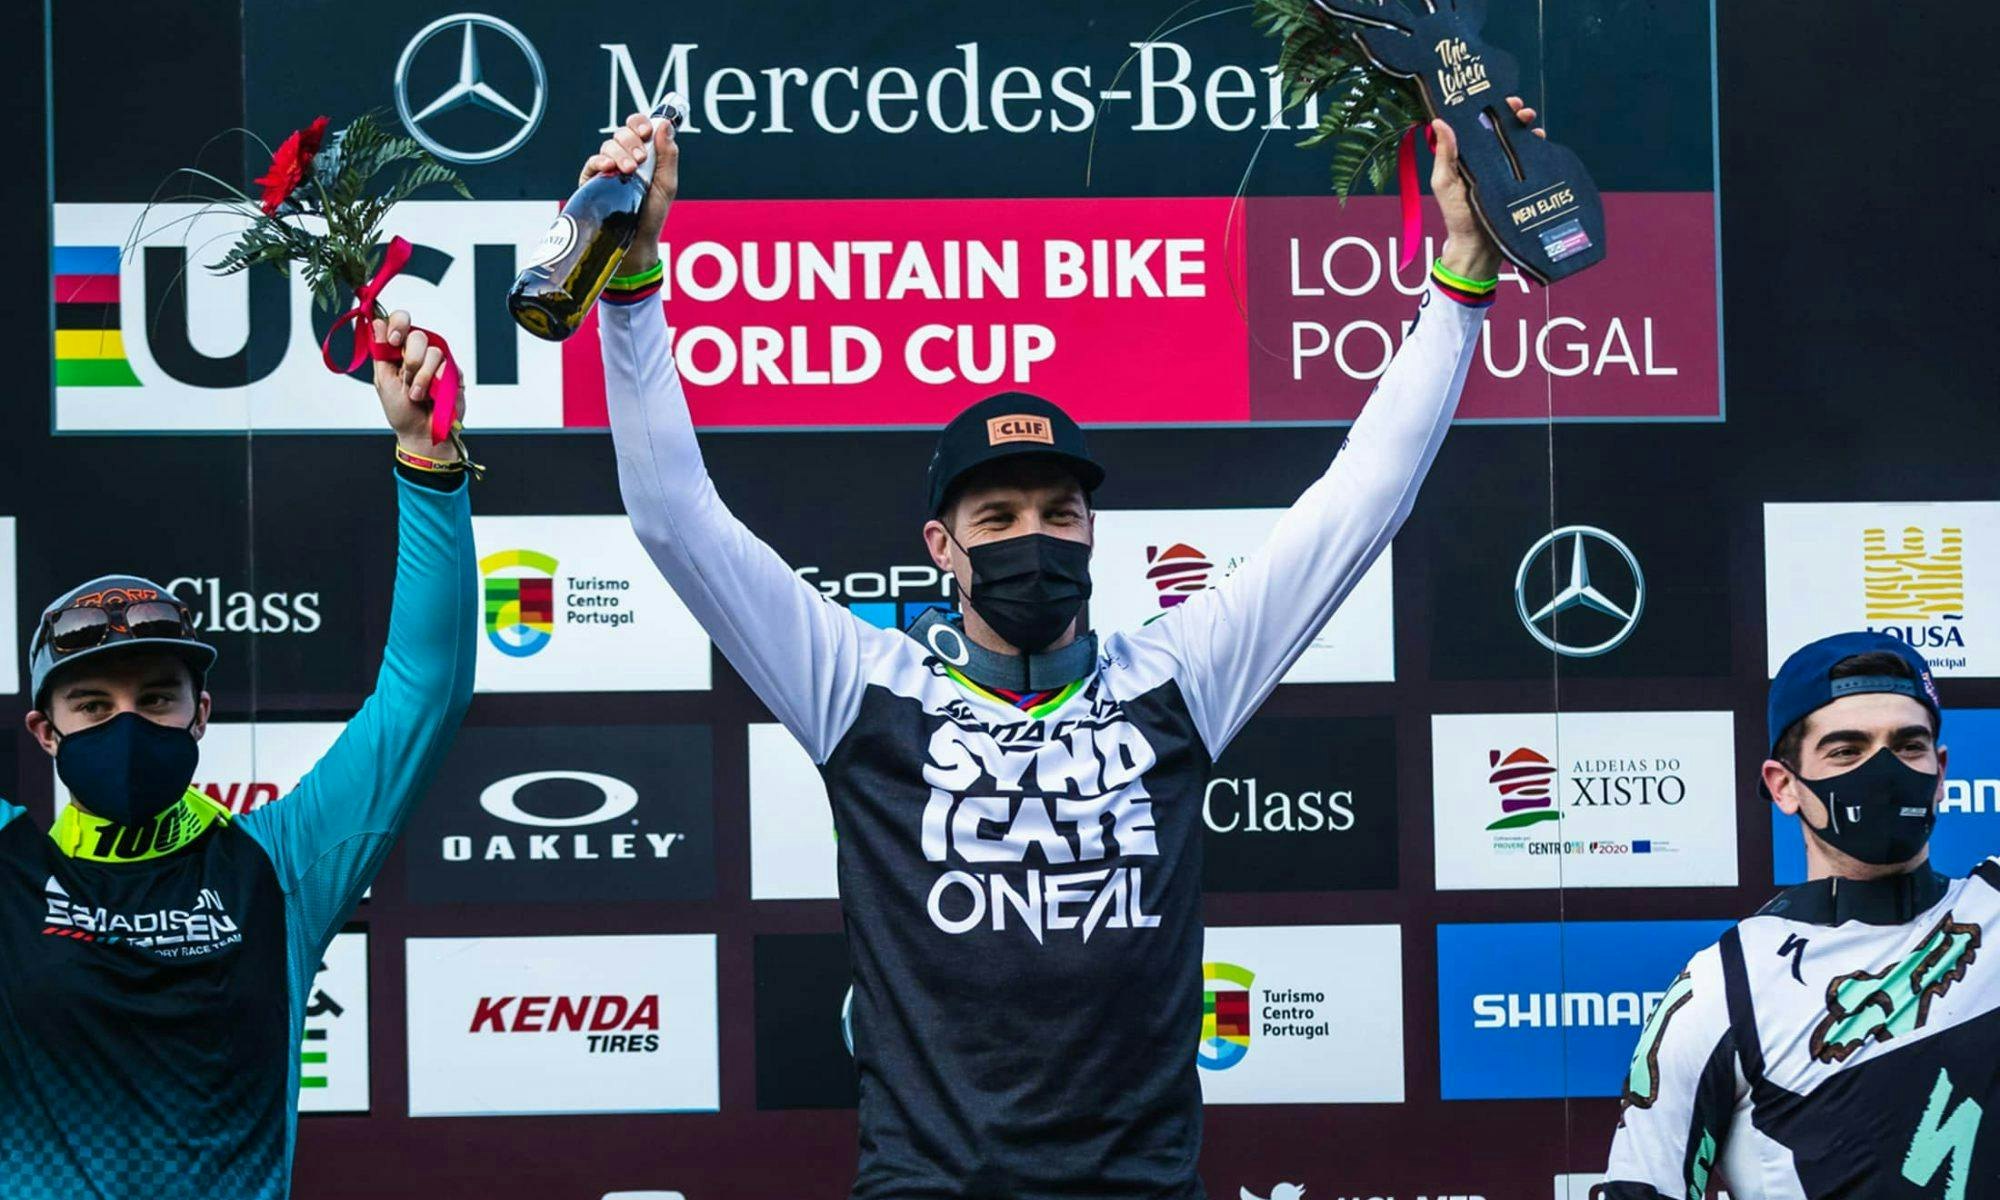 Greg Minnaar standing on the podium in first place